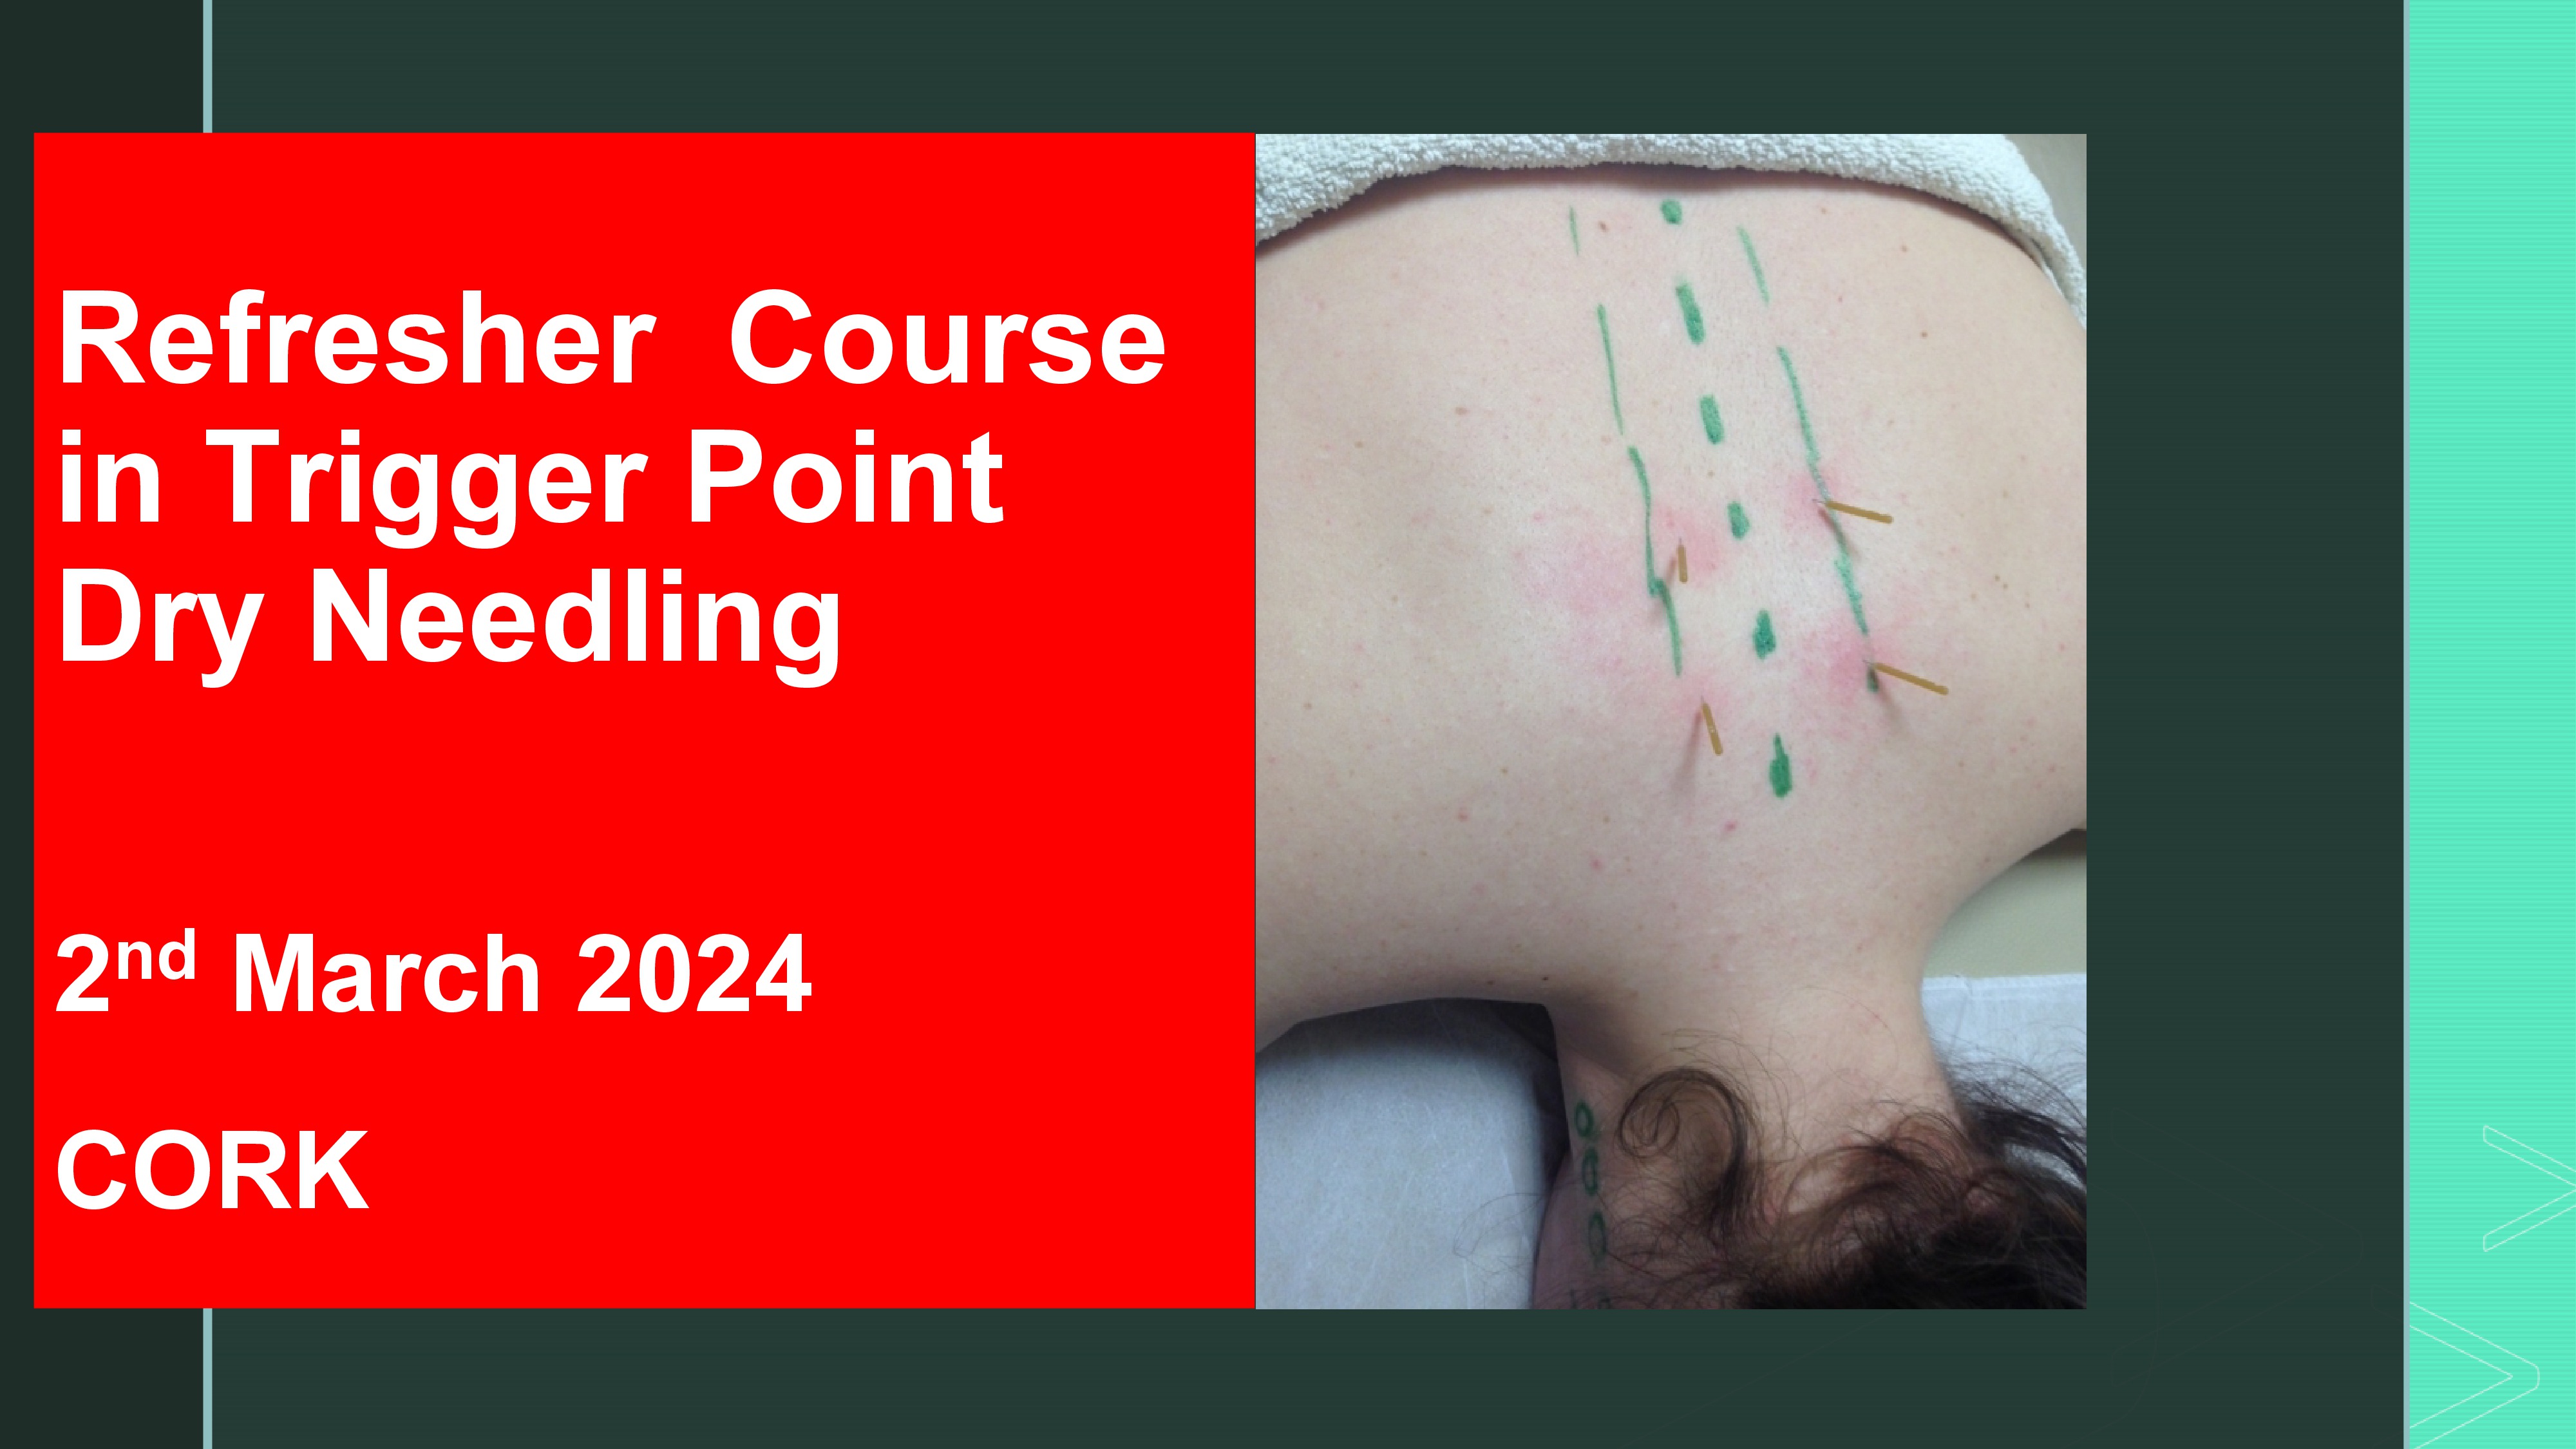 Refresher Course in Trigger Point Dry Needling 2nd March 2024, CORK